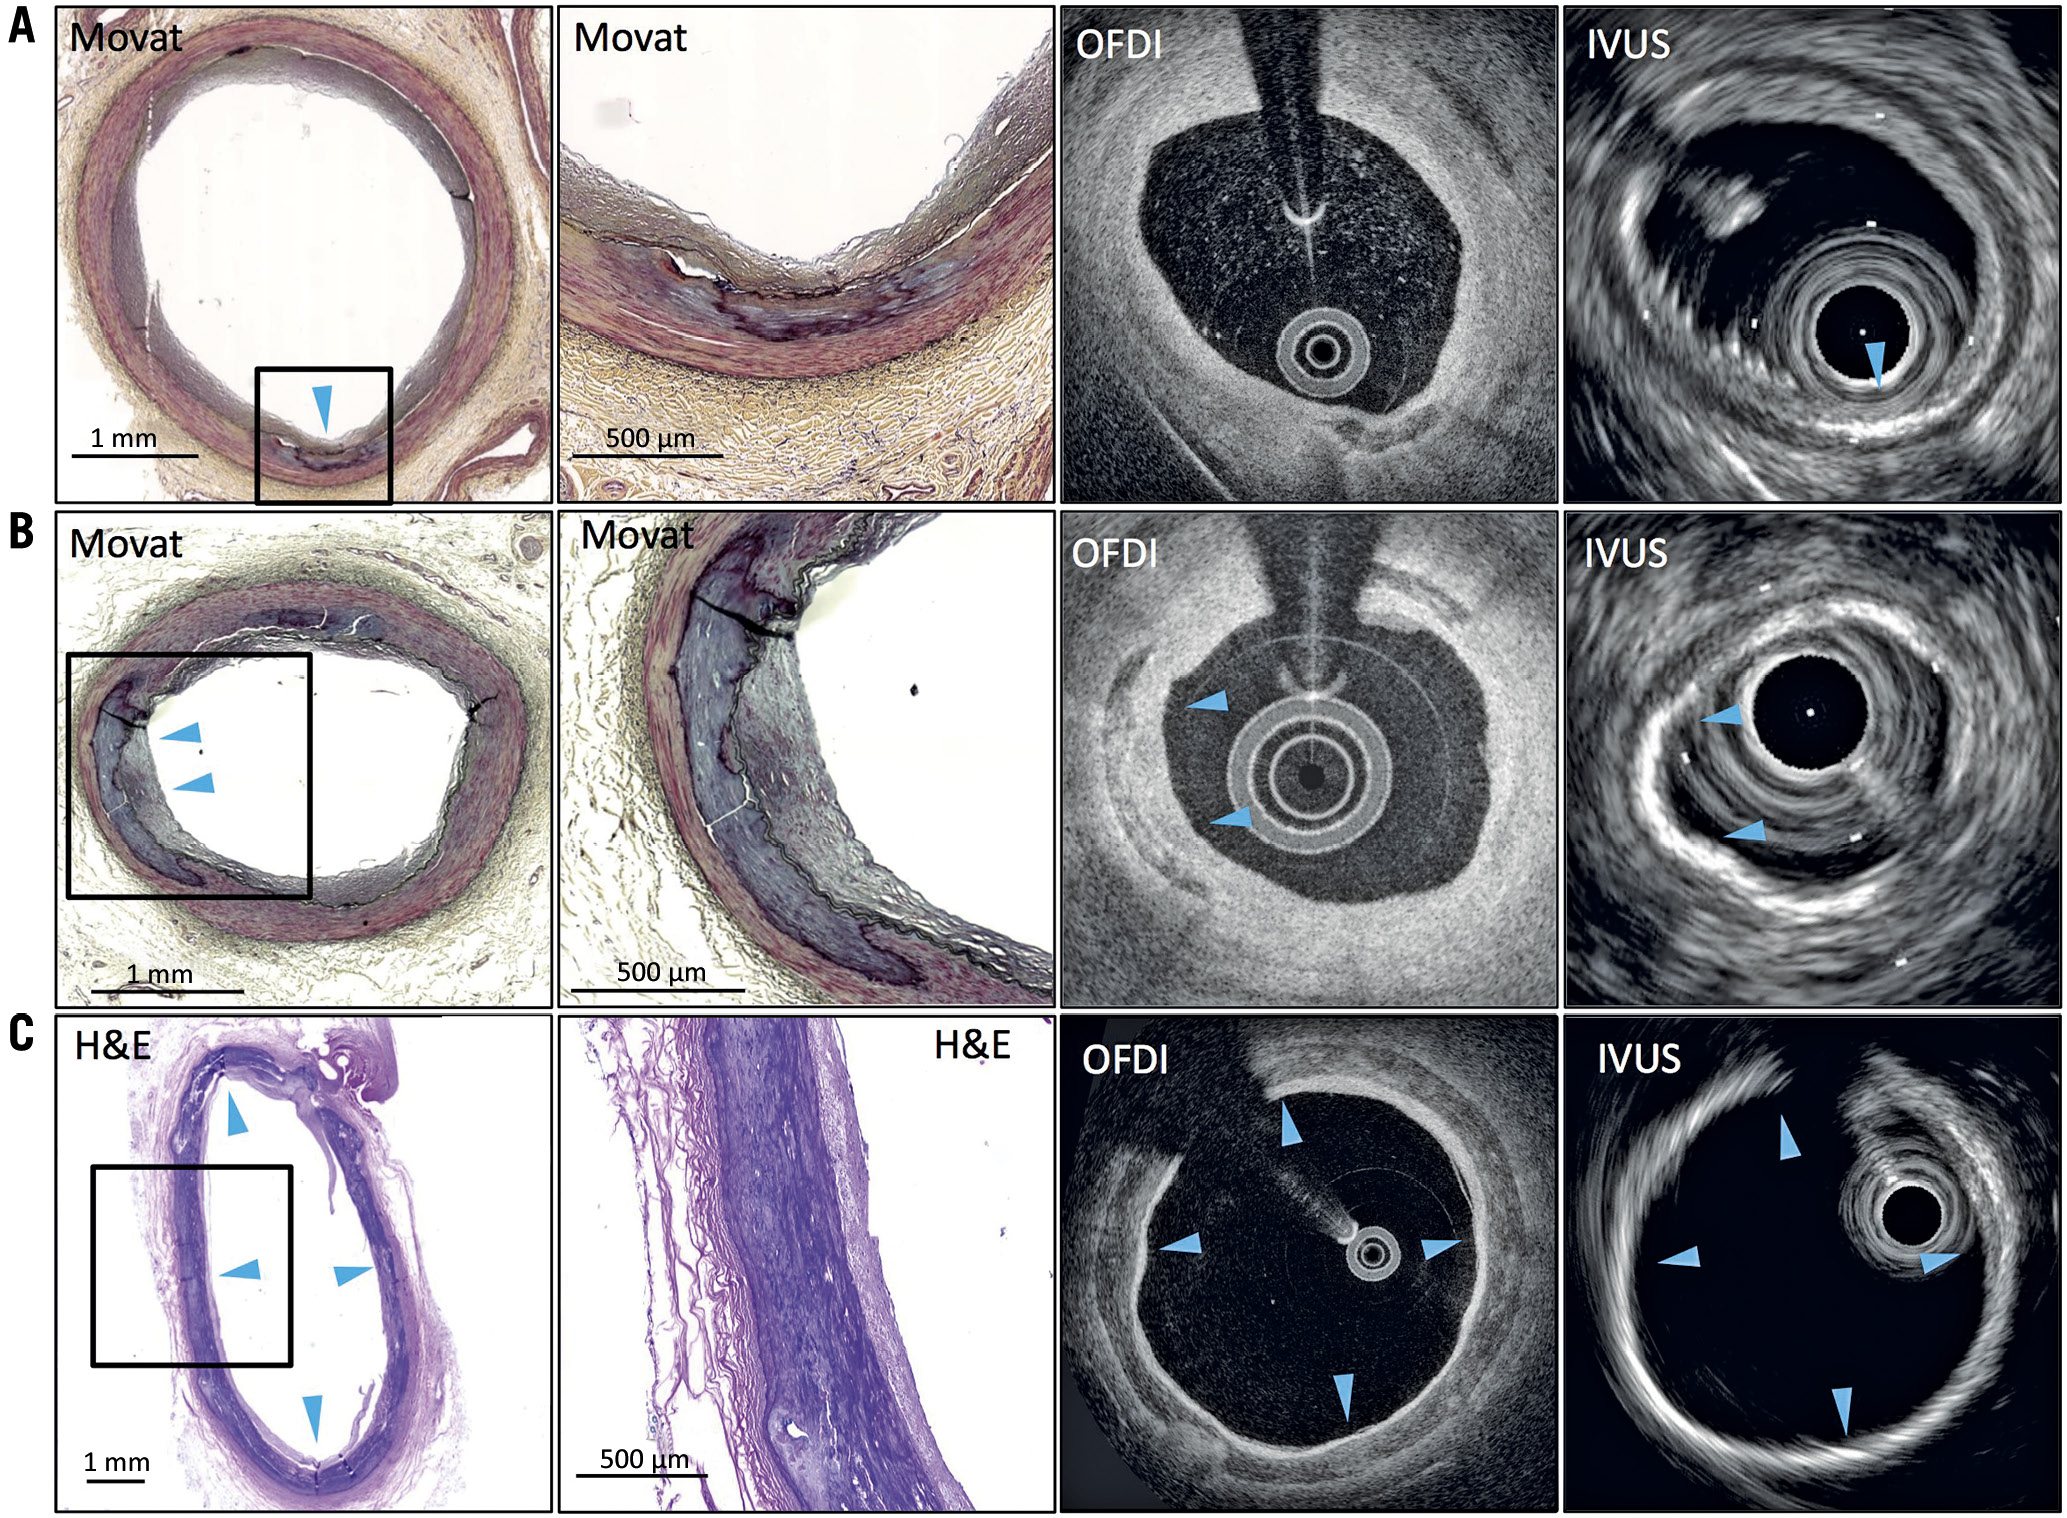 Figure 1. Representative images of medial calcification by IVUS and OFDI co-registered with histology. A) Medial punctate calcification. OFDI shows calcification with clear border (blue arrow). IVUS shows high echoic signal with a low acoustic shadow near the IEL. B) Histological section shows fragmented medial calcification. OFDI shows calcification in media, whereas IVUS shows a high echoic signal right under the IEL due to blooming artefact. C) Circumferential medial sheet calcification. OFDI shows circumferential calcification and IVUS shows high echoic signal with a strong acoustic shadow. Medial calcification (blue arrowheads). IEL: internal elastic lamina; IVUS: intravascular ultrasound; OFDI: optical frequency domain imaging